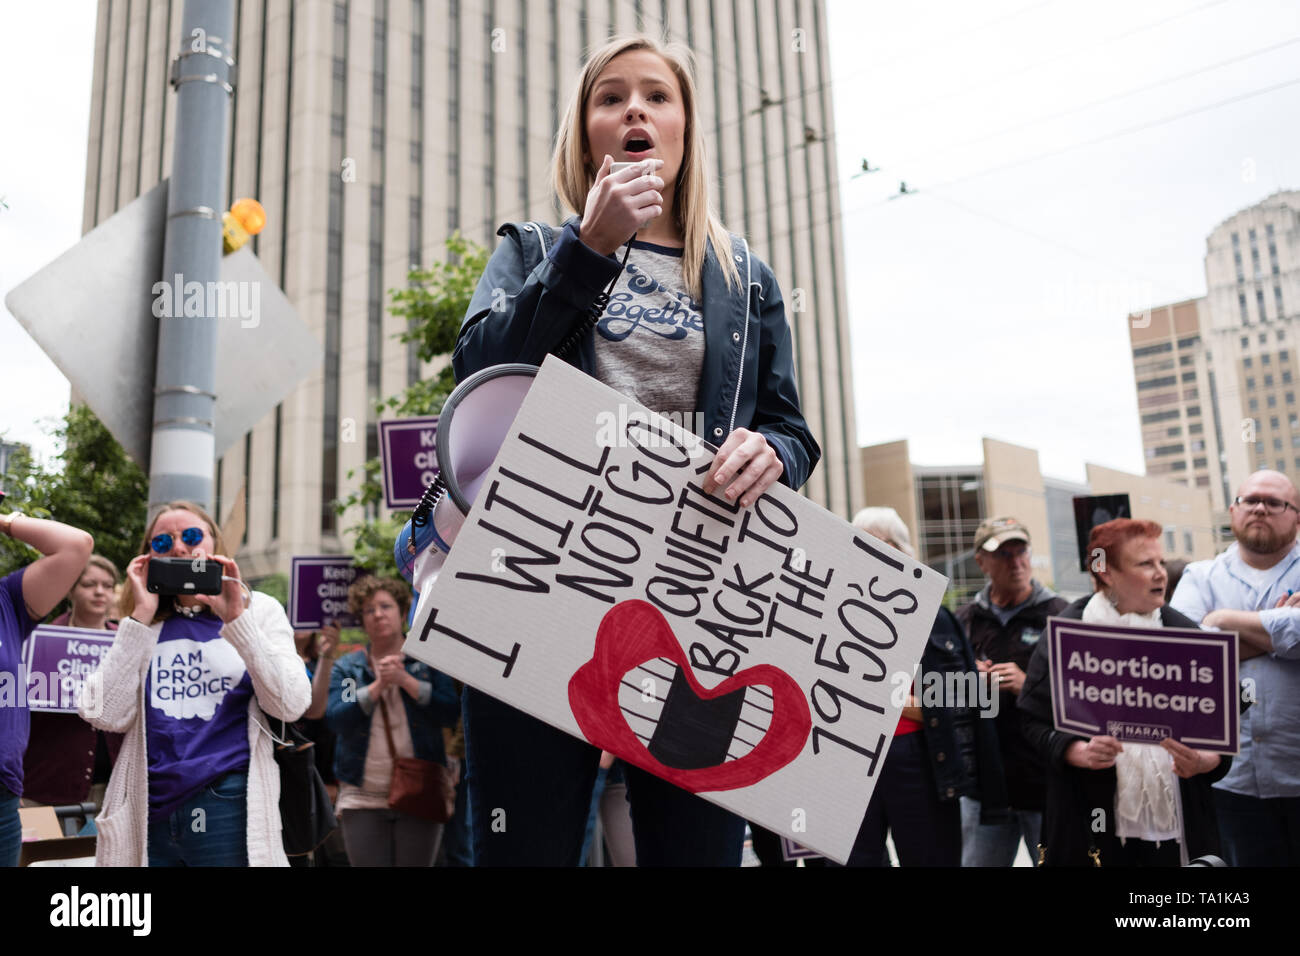 An activist seen chanting slogans on a megaphone while holding a placard that says I will not go quietly back to the 1960s during the protest. Abortion rights activists took part in stop the bans rally nationwide after multiple states pass fetal heartbeat bills. Stock Photo